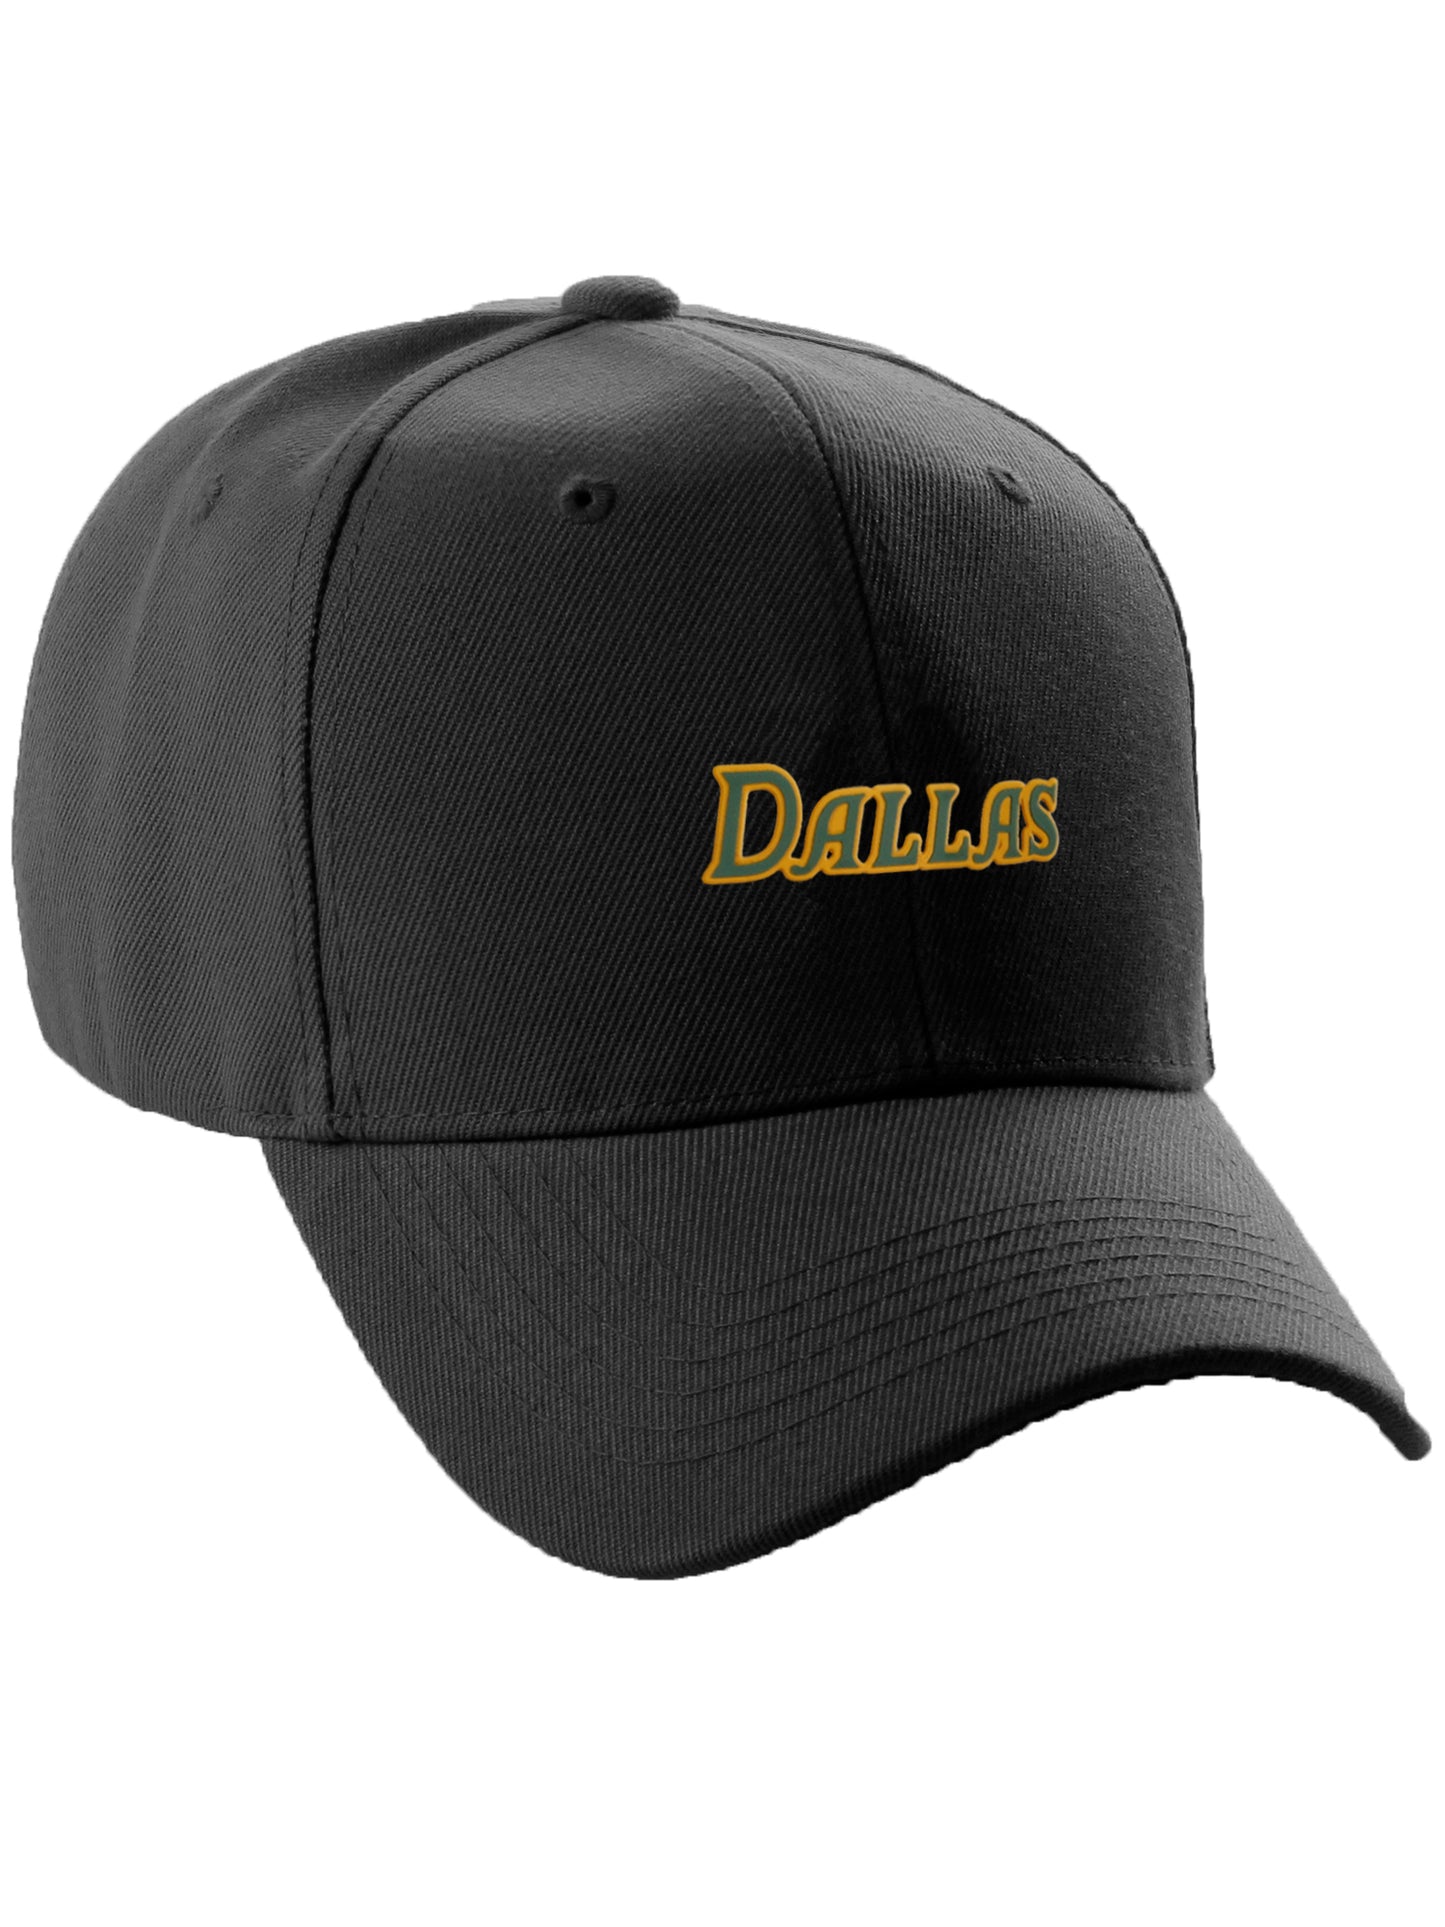 Daxton USA States Classic Curved Bill Mid Profile Structured Golf Dad Hat Cap